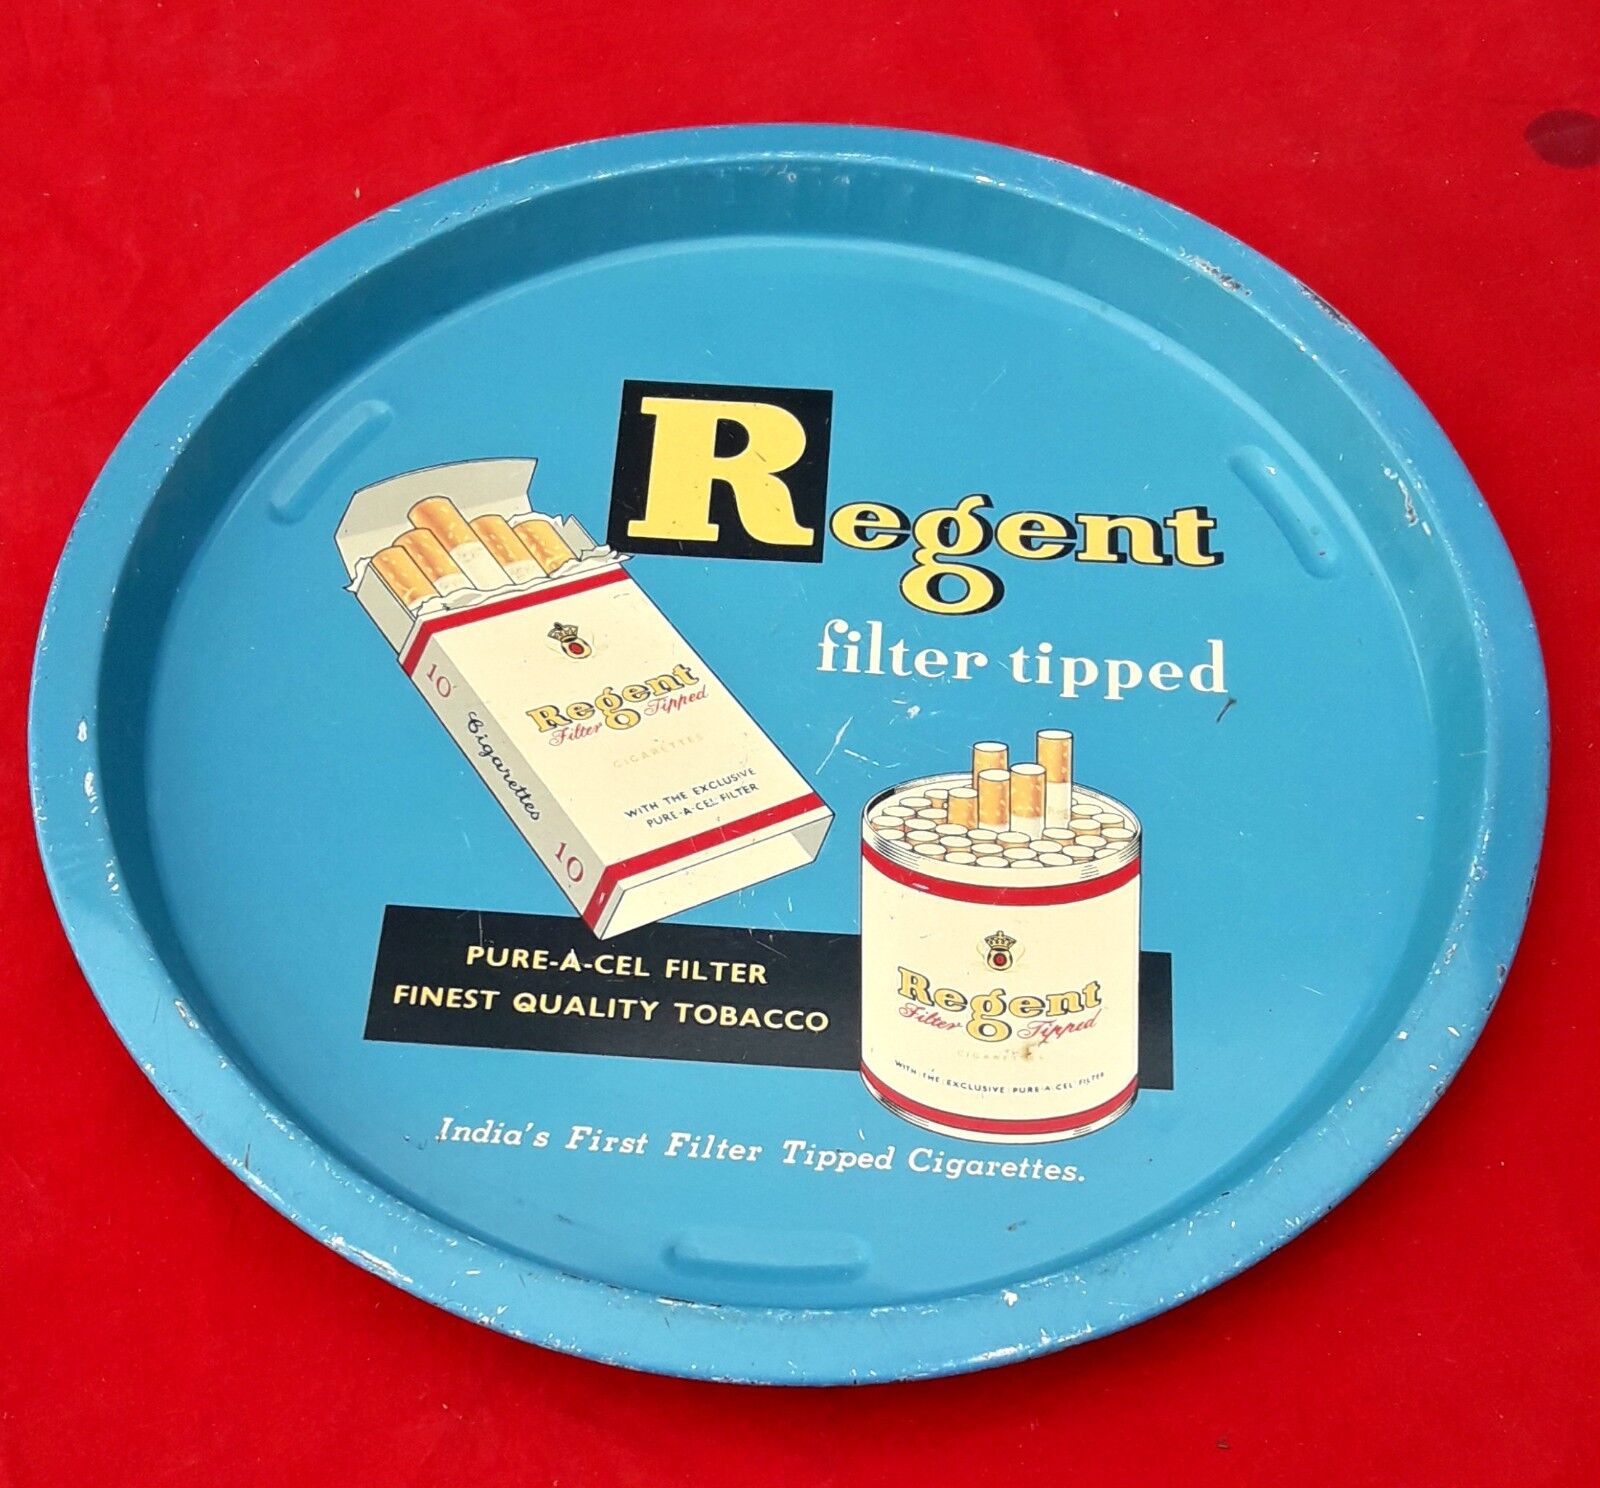 Vintage Rare Regent Filter Tipped Cigarette Adv Print Round Tin Plate Tray T1070